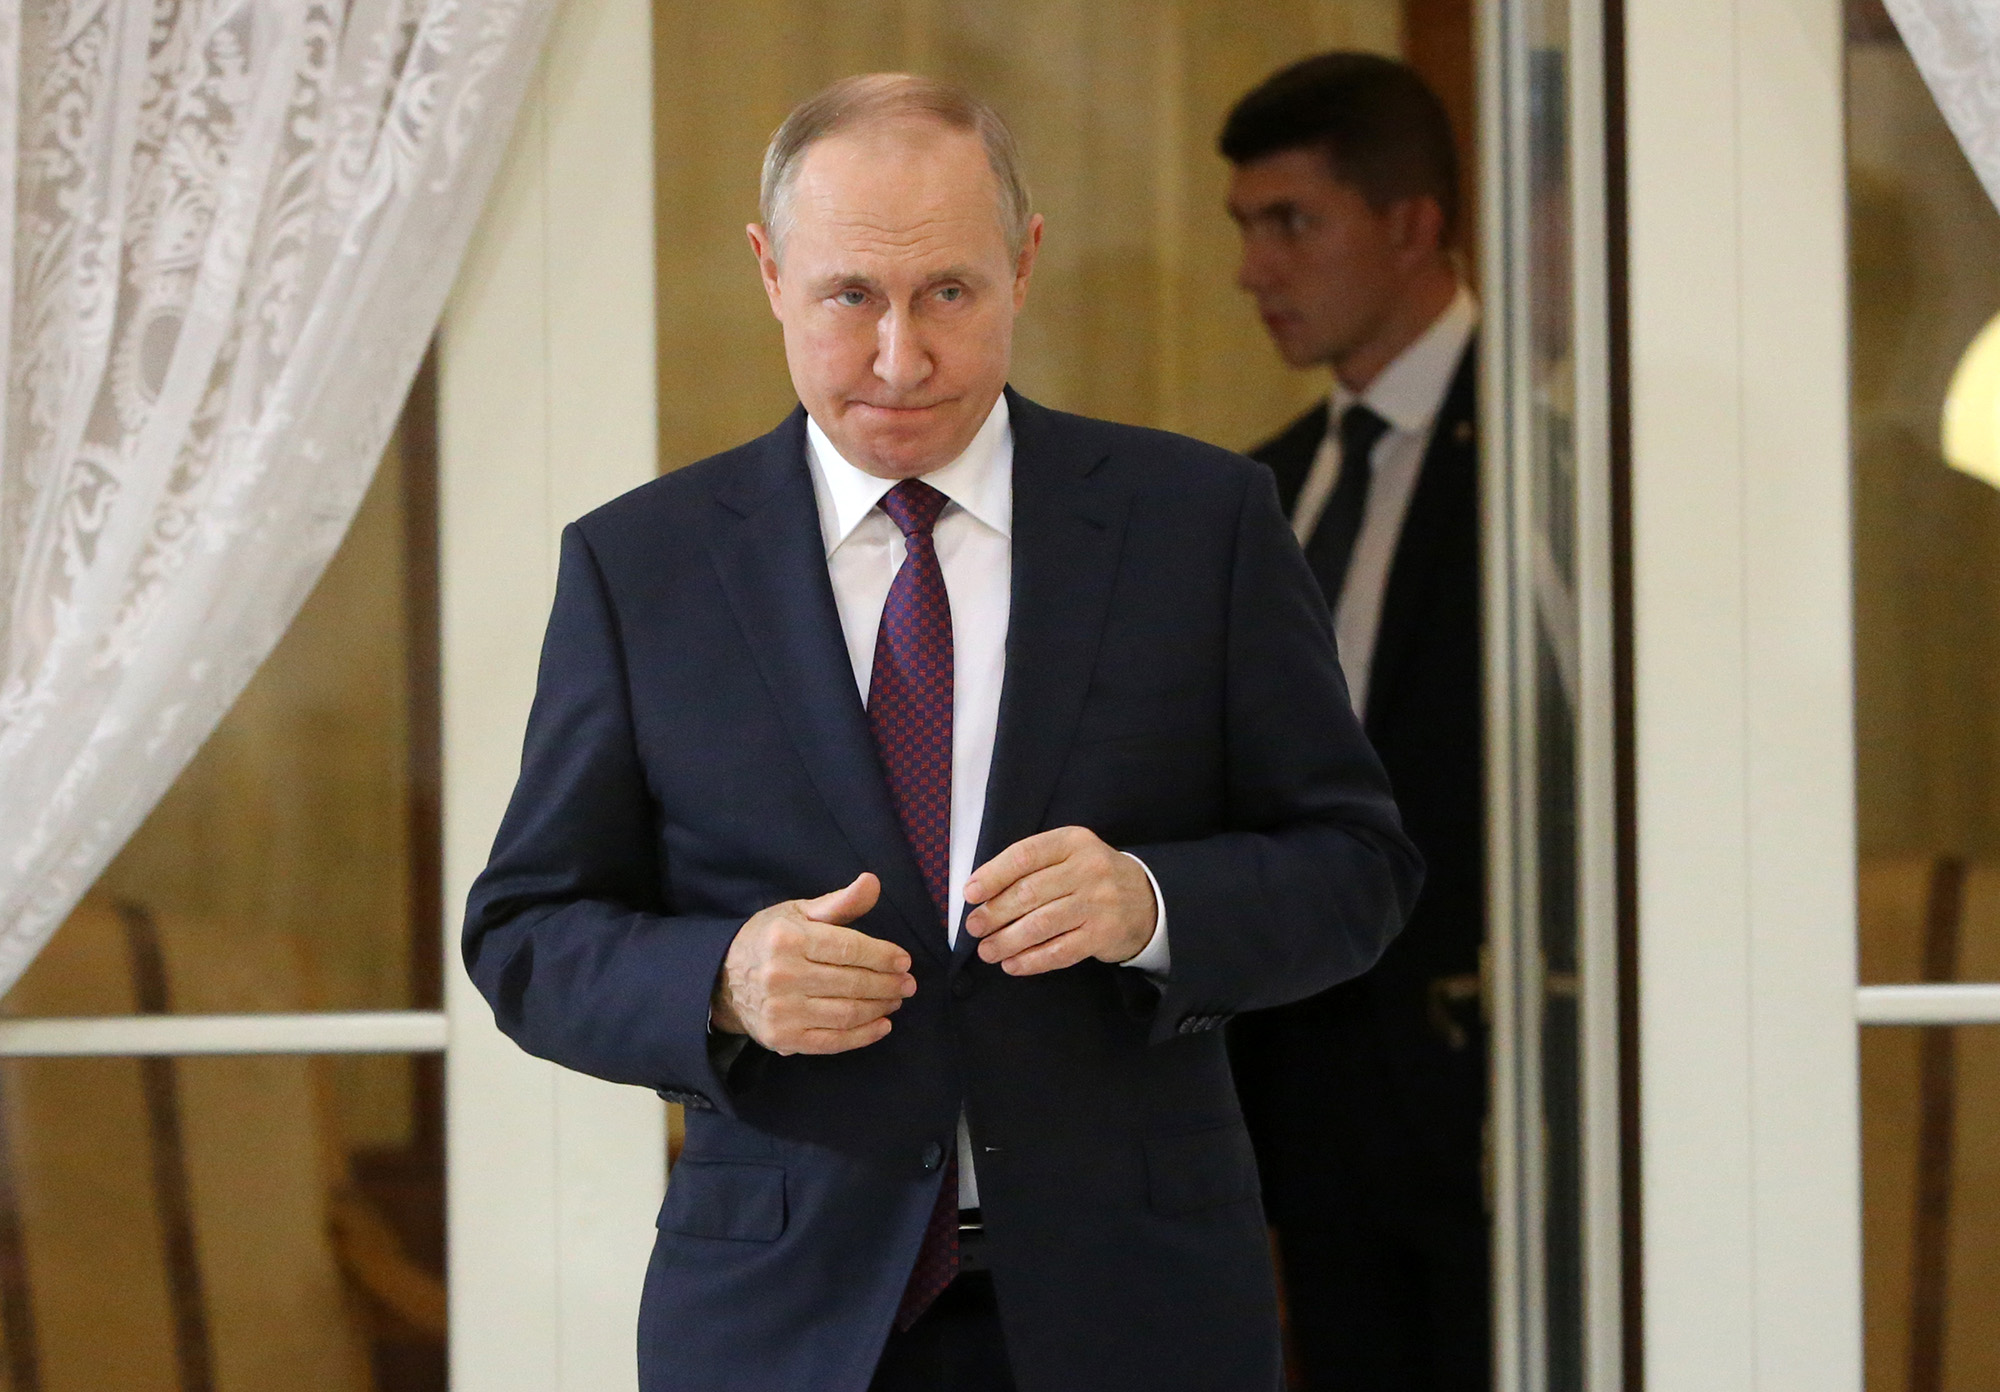 Russian President Vladimir Putin enters the hall for his press conference in Sochi, Russia on October 31.